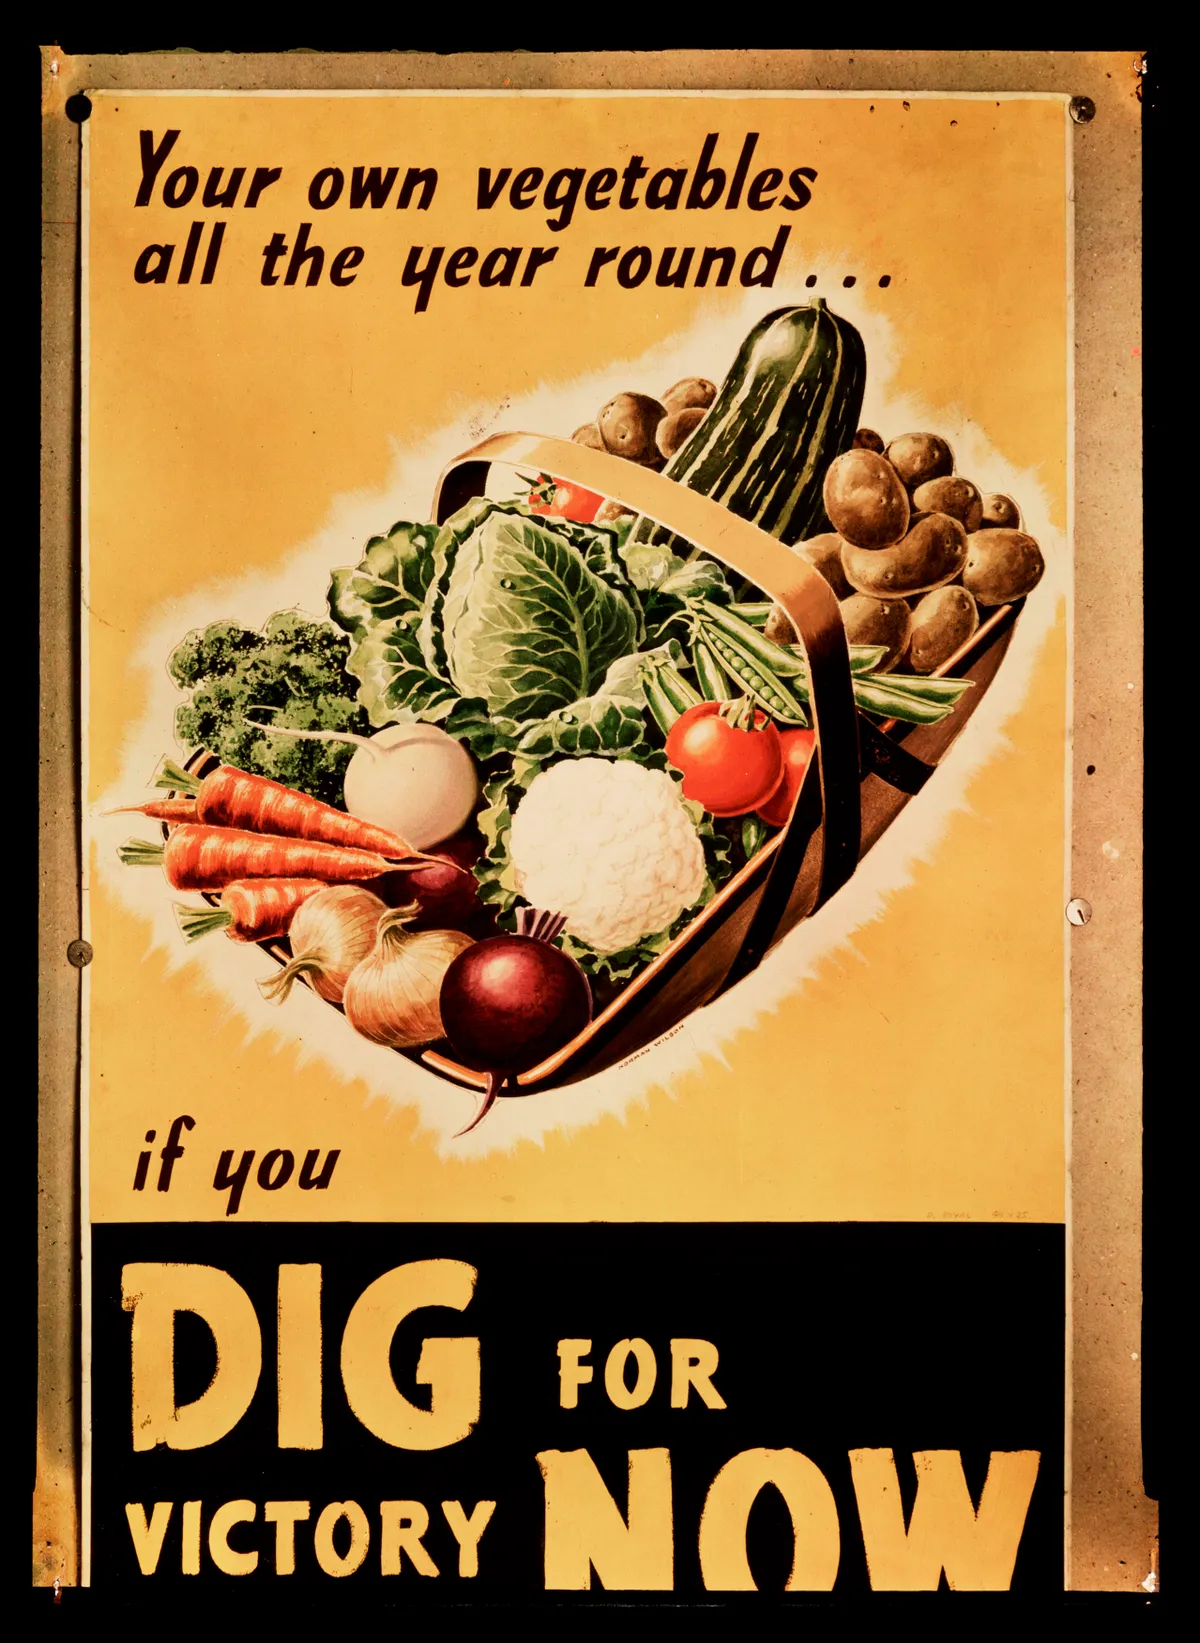 Dig for Victory poster, c 1940.